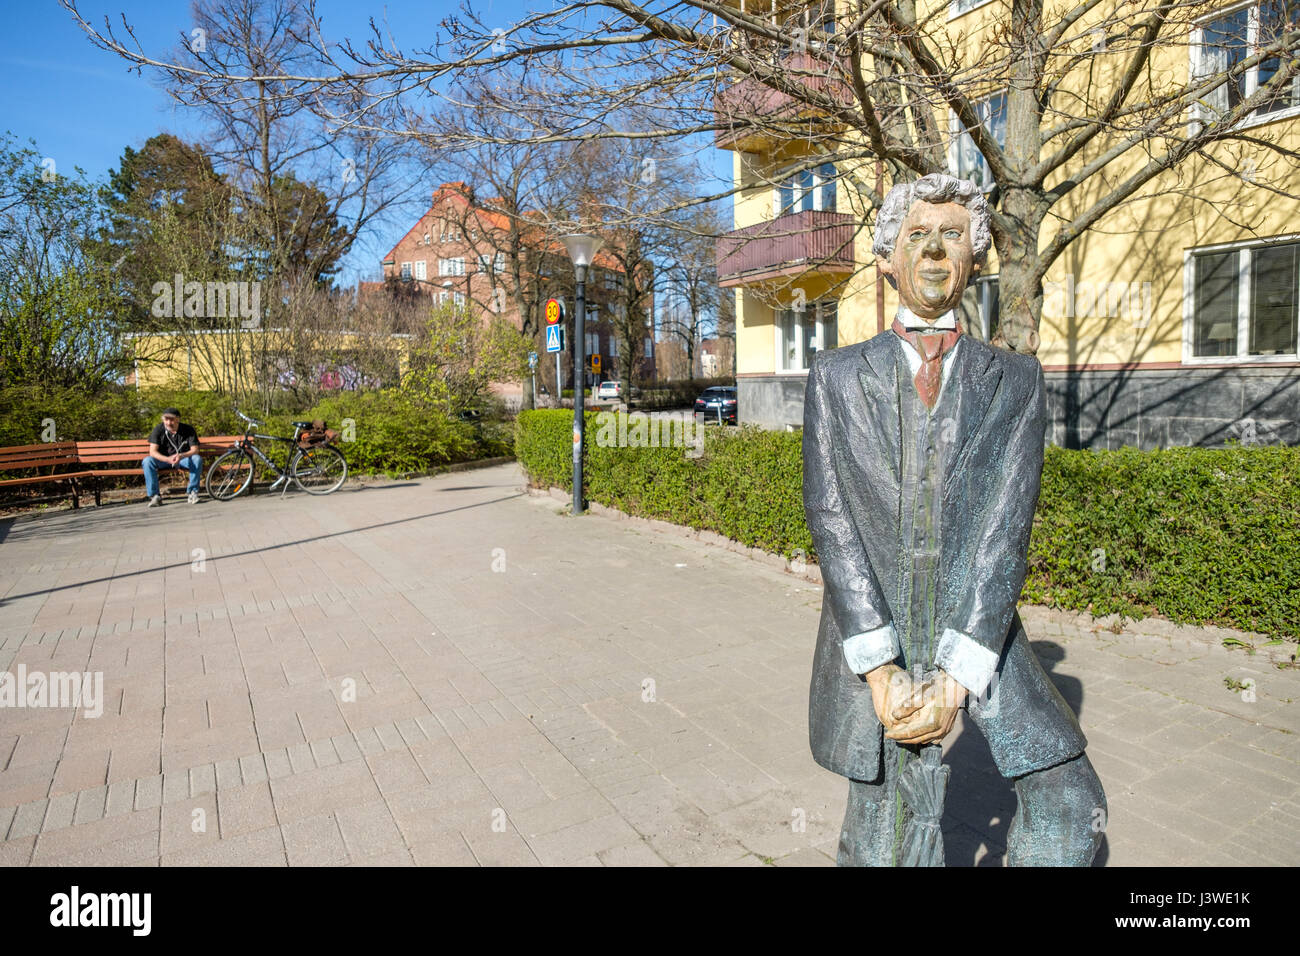 Sculpture by K-G Bejemark of Swedish author and humorist Tage Danielsson in Linkoping, Sweden Stock Photo